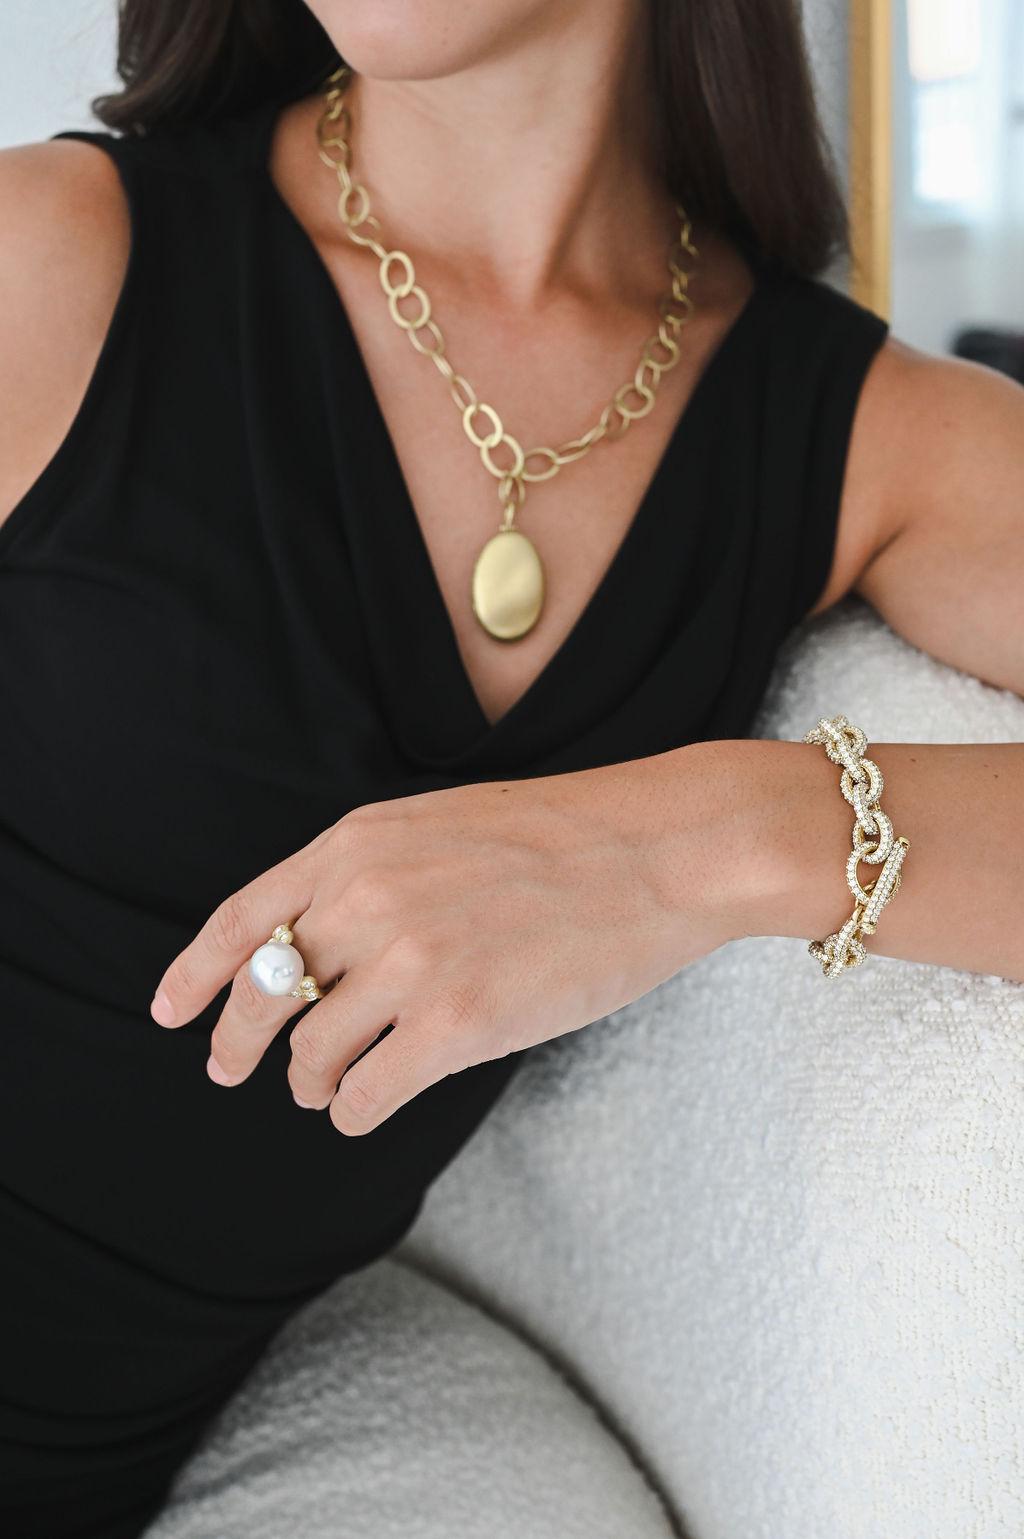 Experience luxury every day in Faye Kim's 18 Karat Gold Handmade Oval Planished Link Chain. The oval planished links with its matte finish gives it gorgeous texture and a bold, modern look. 

Length: 24